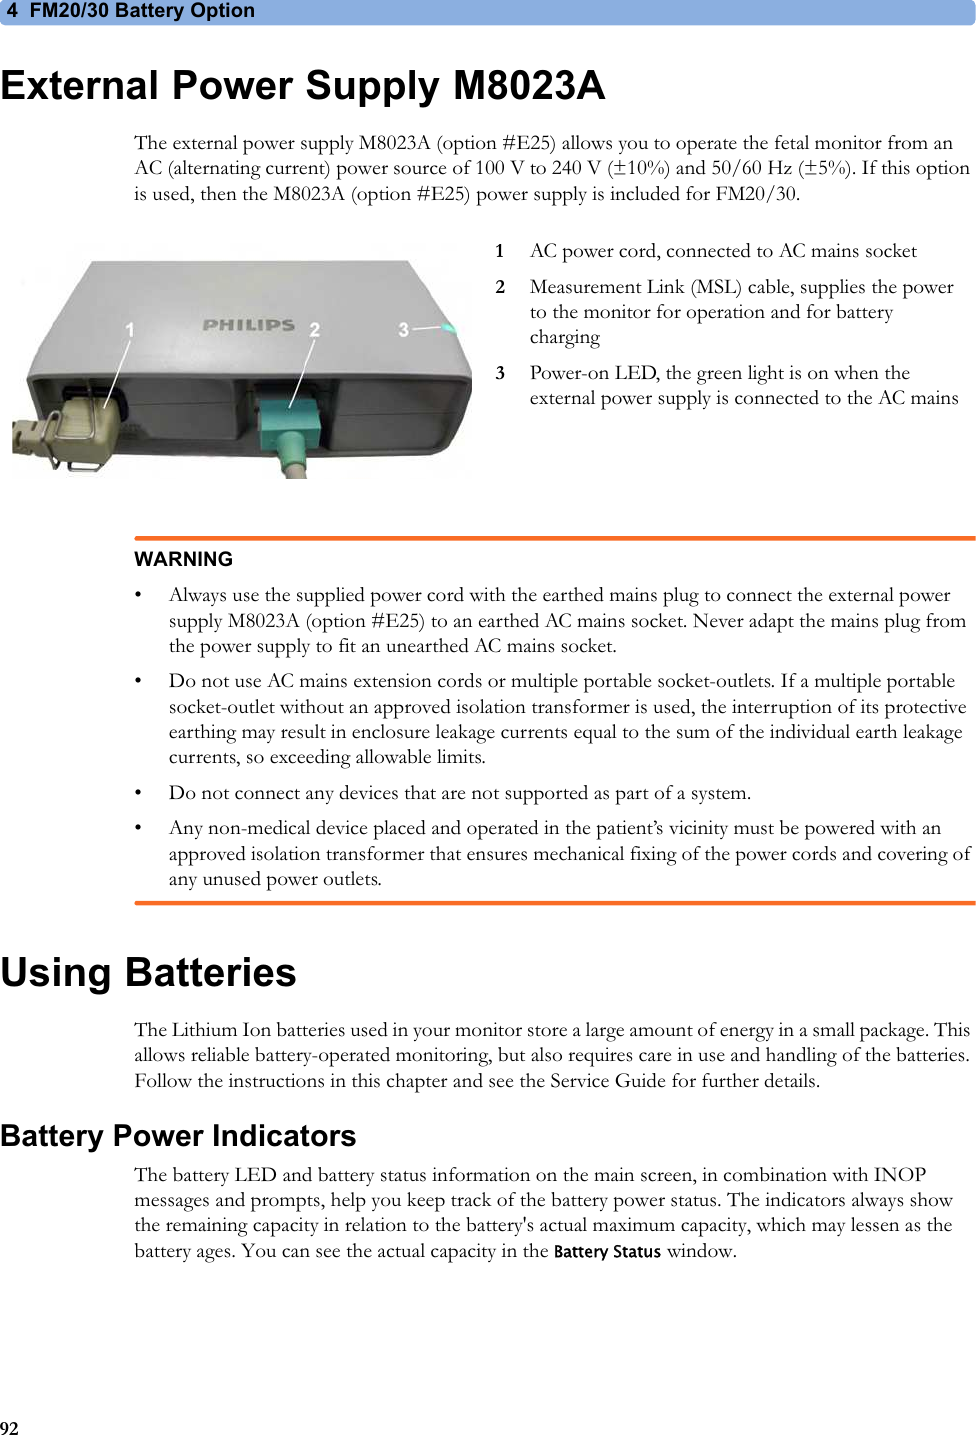 4  FM20/30 Battery Option92External Power Supply M8023AThe external power supply M8023A (option #E25) allows you to operate the fetal monitor from an AC (alternating current) power source of 100 V to 240 V (±10%) and 50/60 Hz (±5%). If this option is used, then the M8023A (option #E25) power supply is included for FM20/30.WARNING• Always use the supplied power cord with the earthed mains plug to connect the external power supply M8023A (option #E25) to an earthed AC mains socket. Never adapt the mains plug from the power supply to fit an unearthed AC mains socket.• Do not use AC mains extension cords or multiple portable socket-outlets. If a multiple portable socket-outlet without an approved isolation transformer is used, the interruption of its protective earthing may result in enclosure leakage currents equal to the sum of the individual earth leakage currents, so exceeding allowable limits.• Do not connect any devices that are not supported as part of a system.• Any non-medical device placed and operated in the patient’s vicinity must be powered with an approved isolation transformer that ensures mechanical fixing of the power cords and covering of any unused power outlets.Using BatteriesThe Lithium Ion batteries used in your monitor store a large amount of energy in a small package. This allows reliable battery-operated monitoring, but also requires care in use and handling of the batteries. Follow the instructions in this chapter and see the Service Guide for further details.Battery Power IndicatorsThe battery LED and battery status information on the main screen, in combination with INOP messages and prompts, help you keep track of the battery power status. The indicators always show the remaining capacity in relation to the battery&apos;s actual maximum capacity, which may lessen as the battery ages. You can see the actual capacity in the Battery Status window.1AC power cord, connected to AC mains socket2Measurement Link (MSL) cable, supplies the power to the monitor for operation and for battery charging3Power-on LED, the green light is on when the external power supply is connected to the AC mains